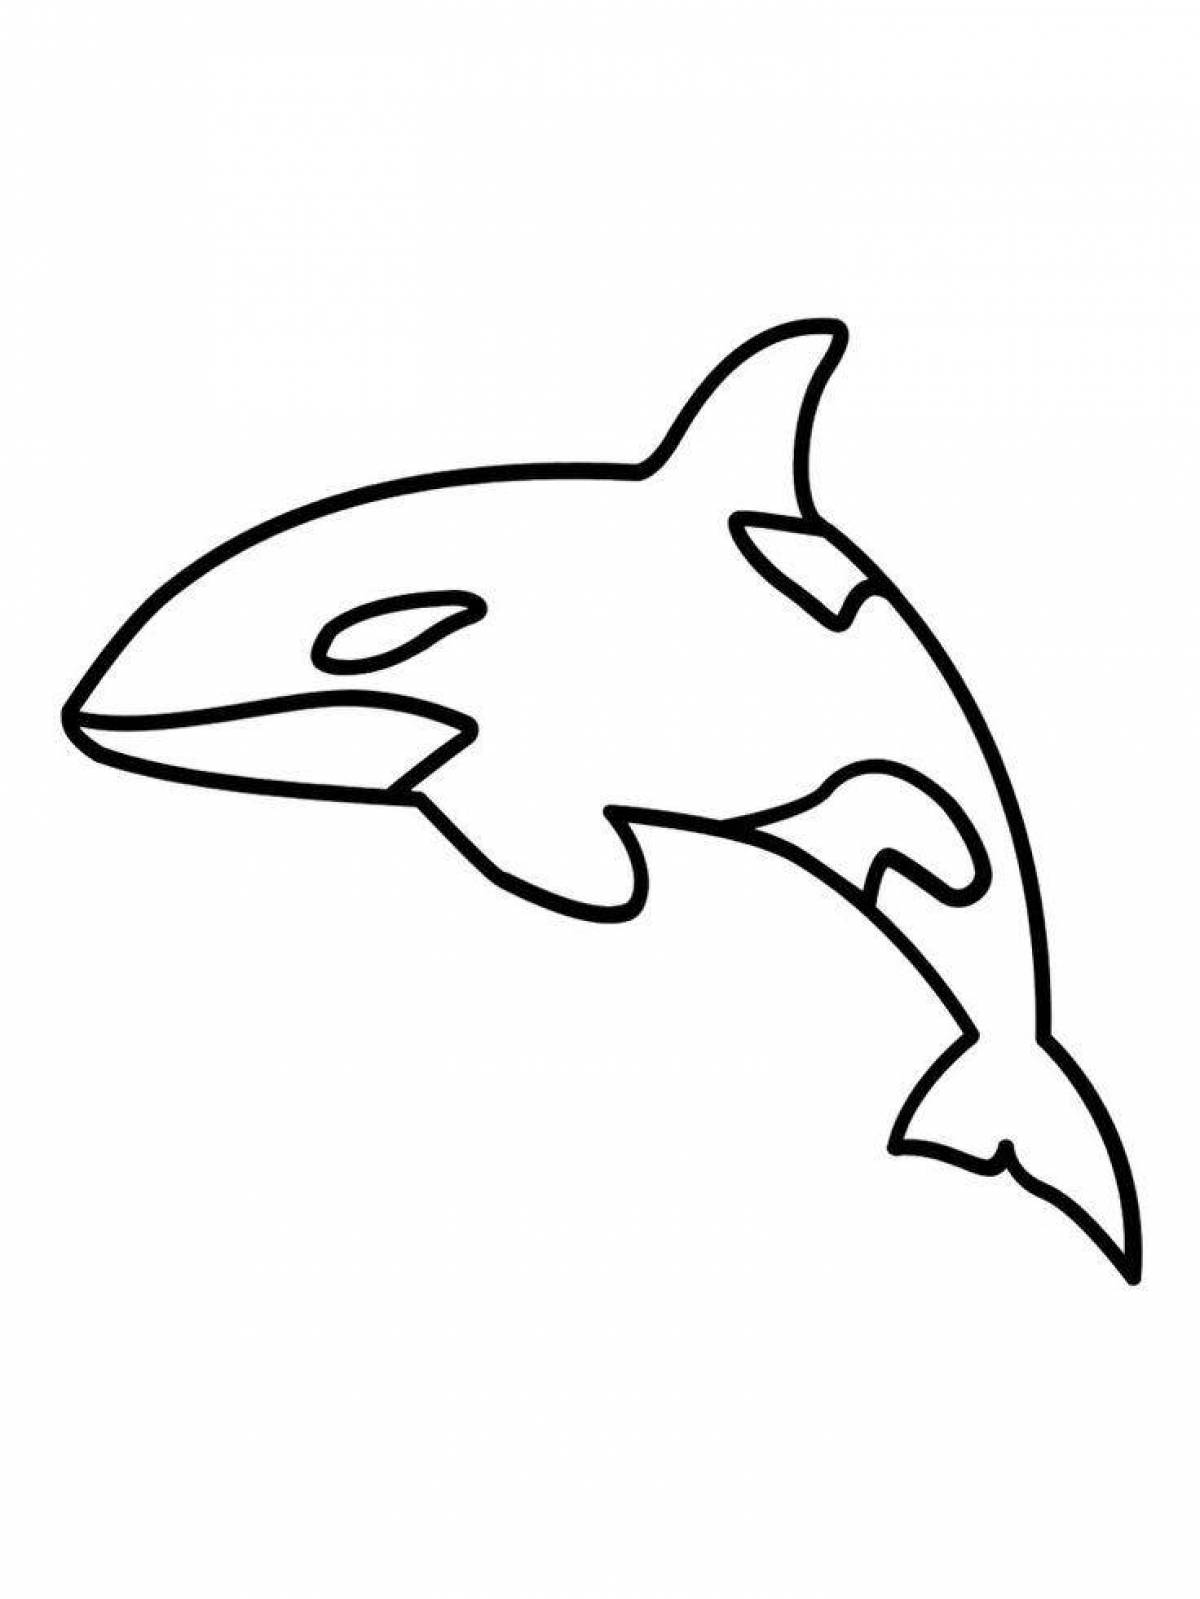 Outstanding killer whale coloring page